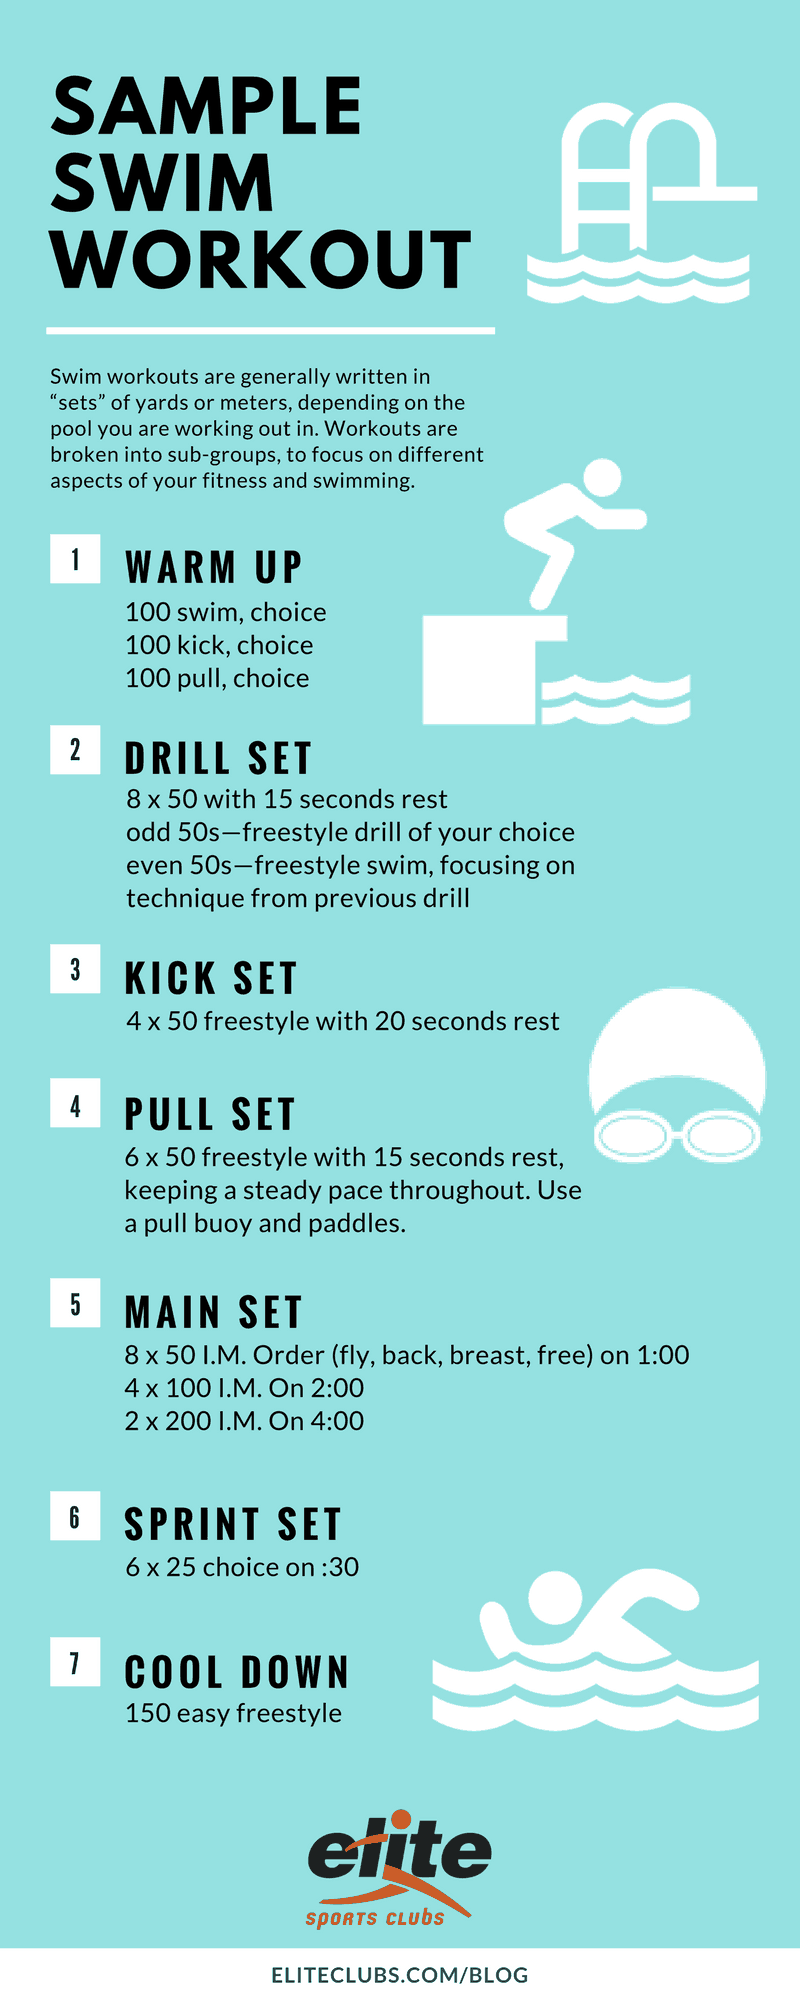 How to Read a Swim Workout